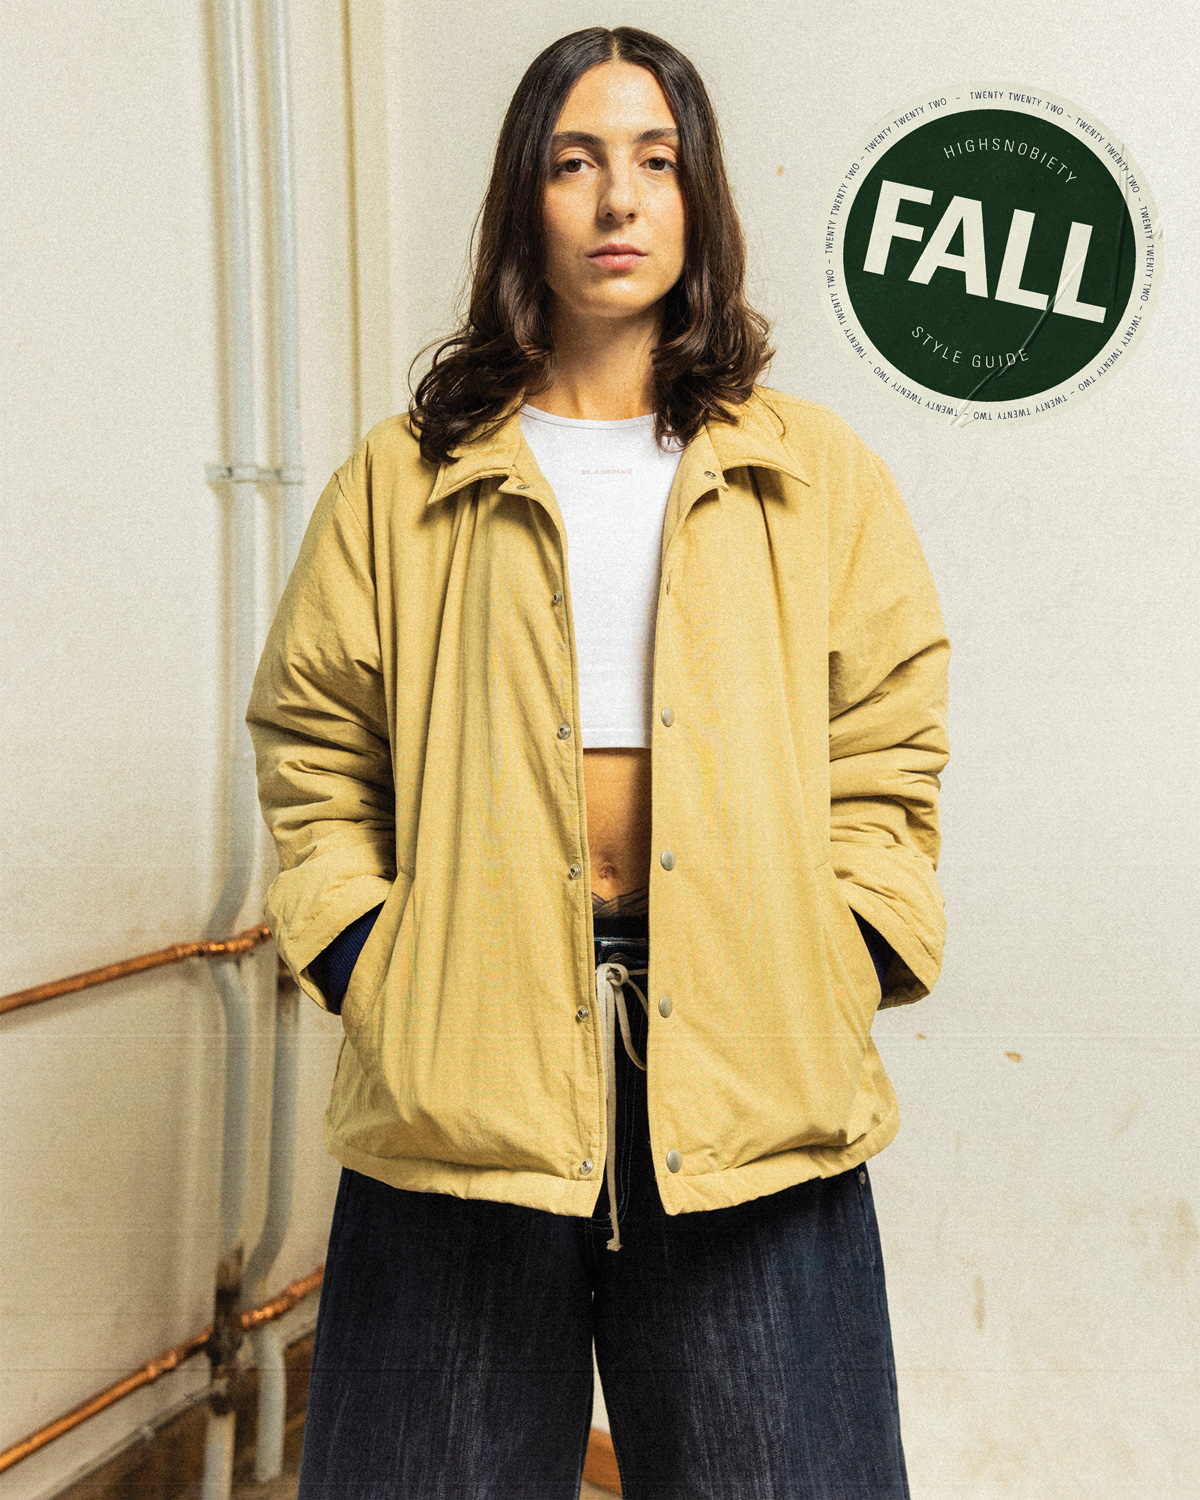 Transition into Fall with these Coach Jackets